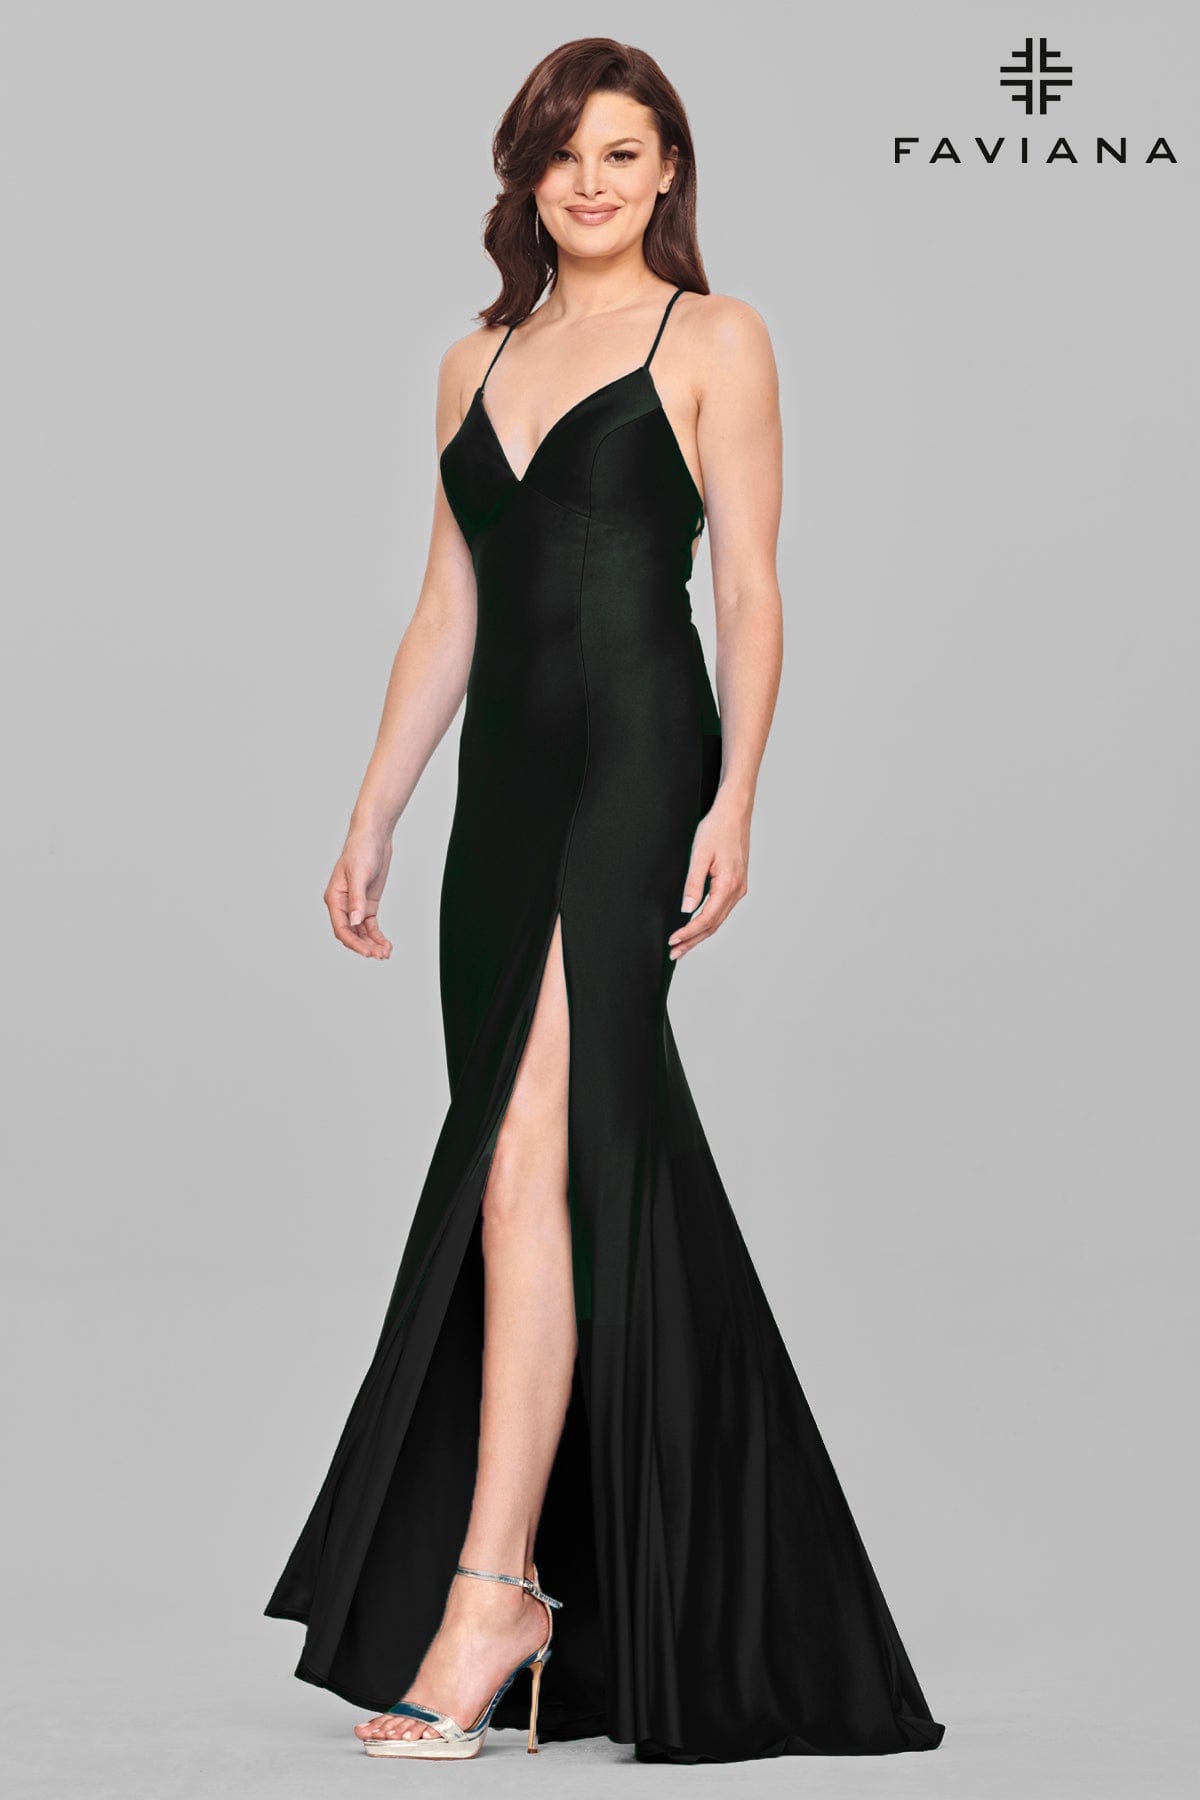 Black V Neckline Prom Dress With Stretch Fabric And Corset Back